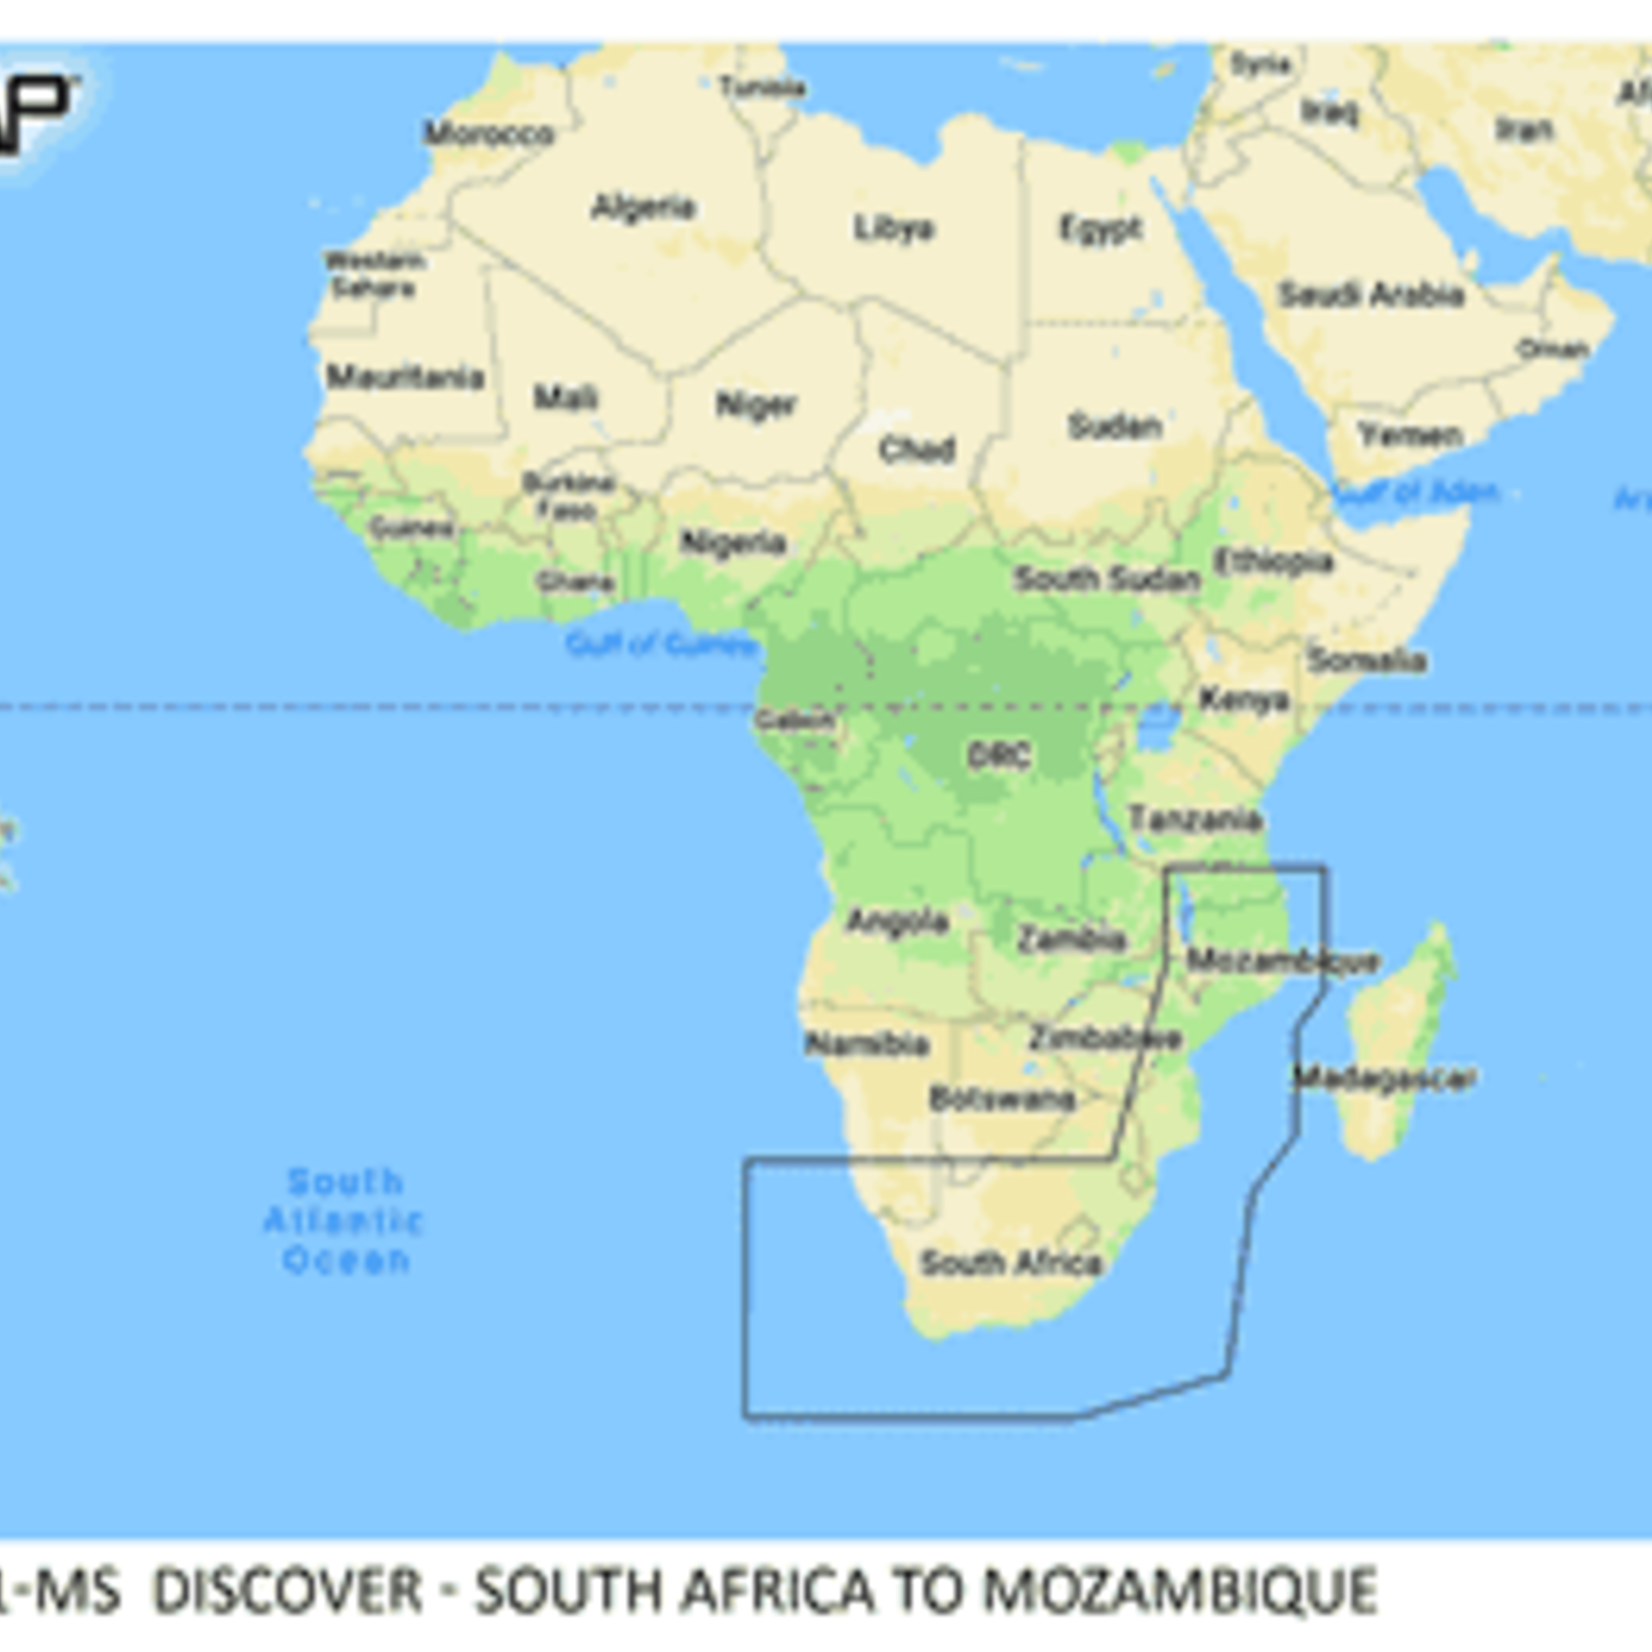 C-MAP DISCOVER - South Africa to Mozambique